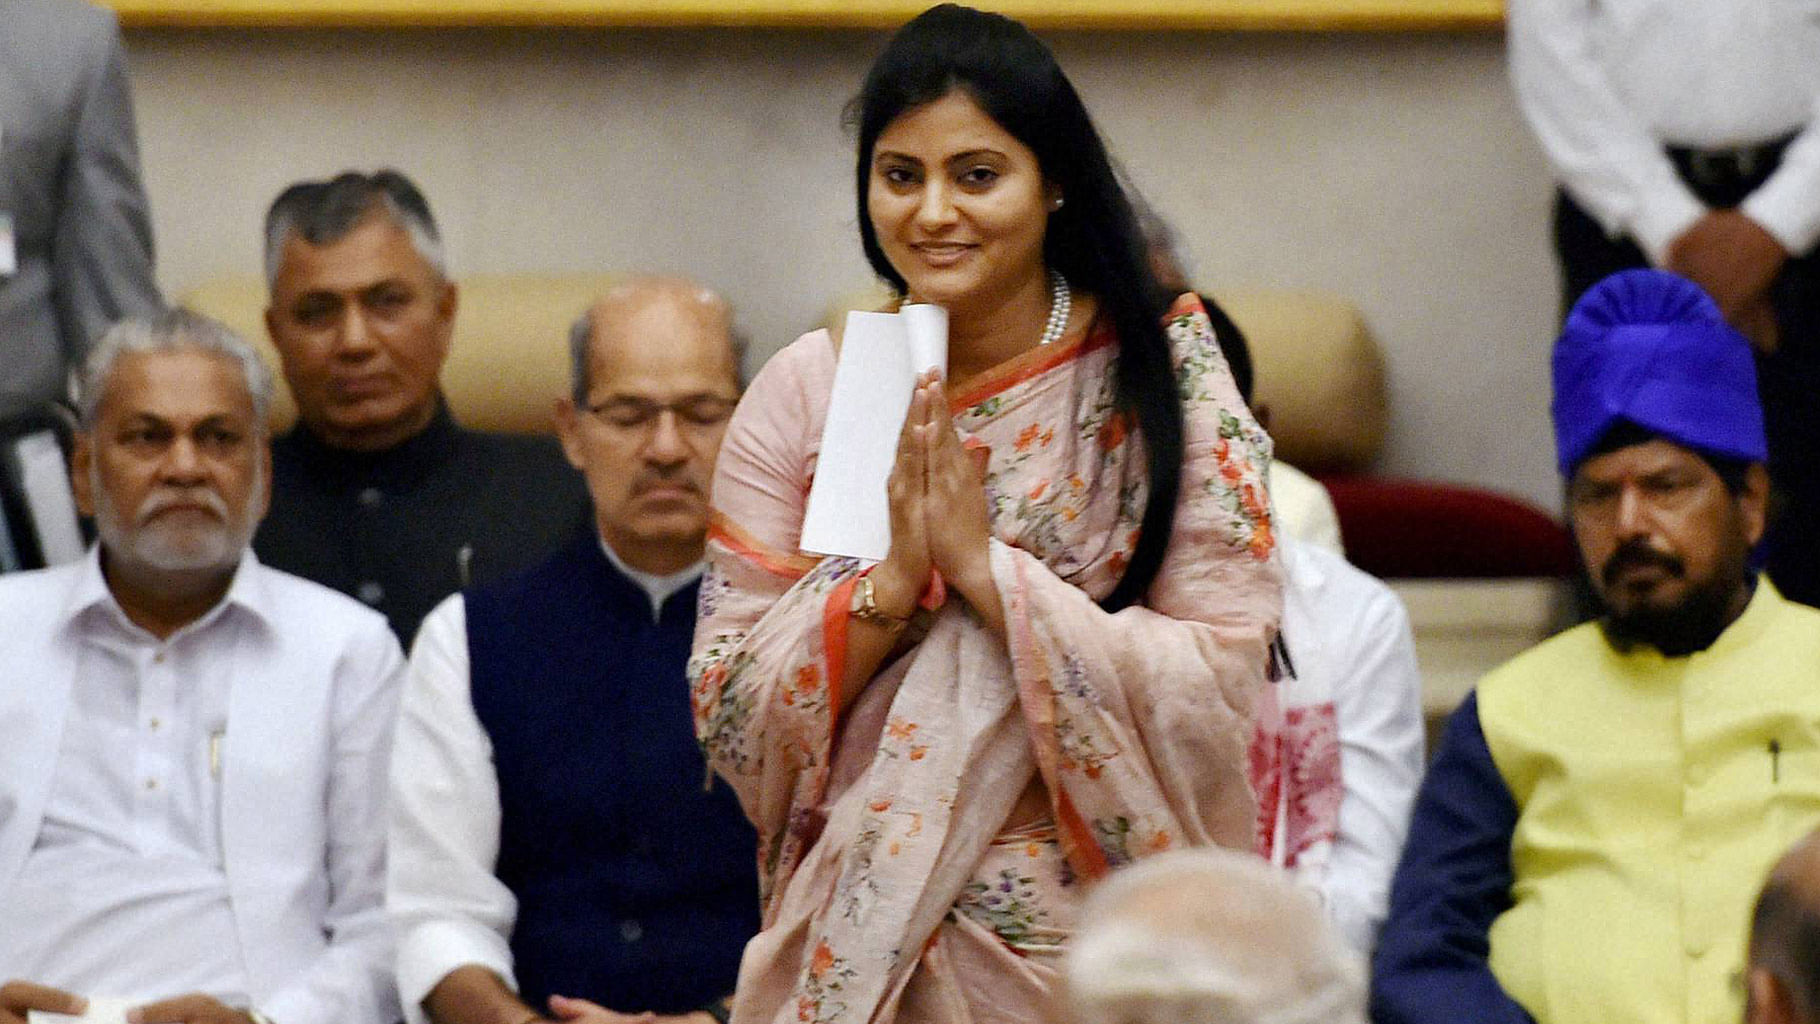 Apna Dal leader Anupriya Patel before being sworn-in as Minister of State at a ceremony at Rashtrapati Bhavan in New Delhi on Tuesday. (Photo: PTI)